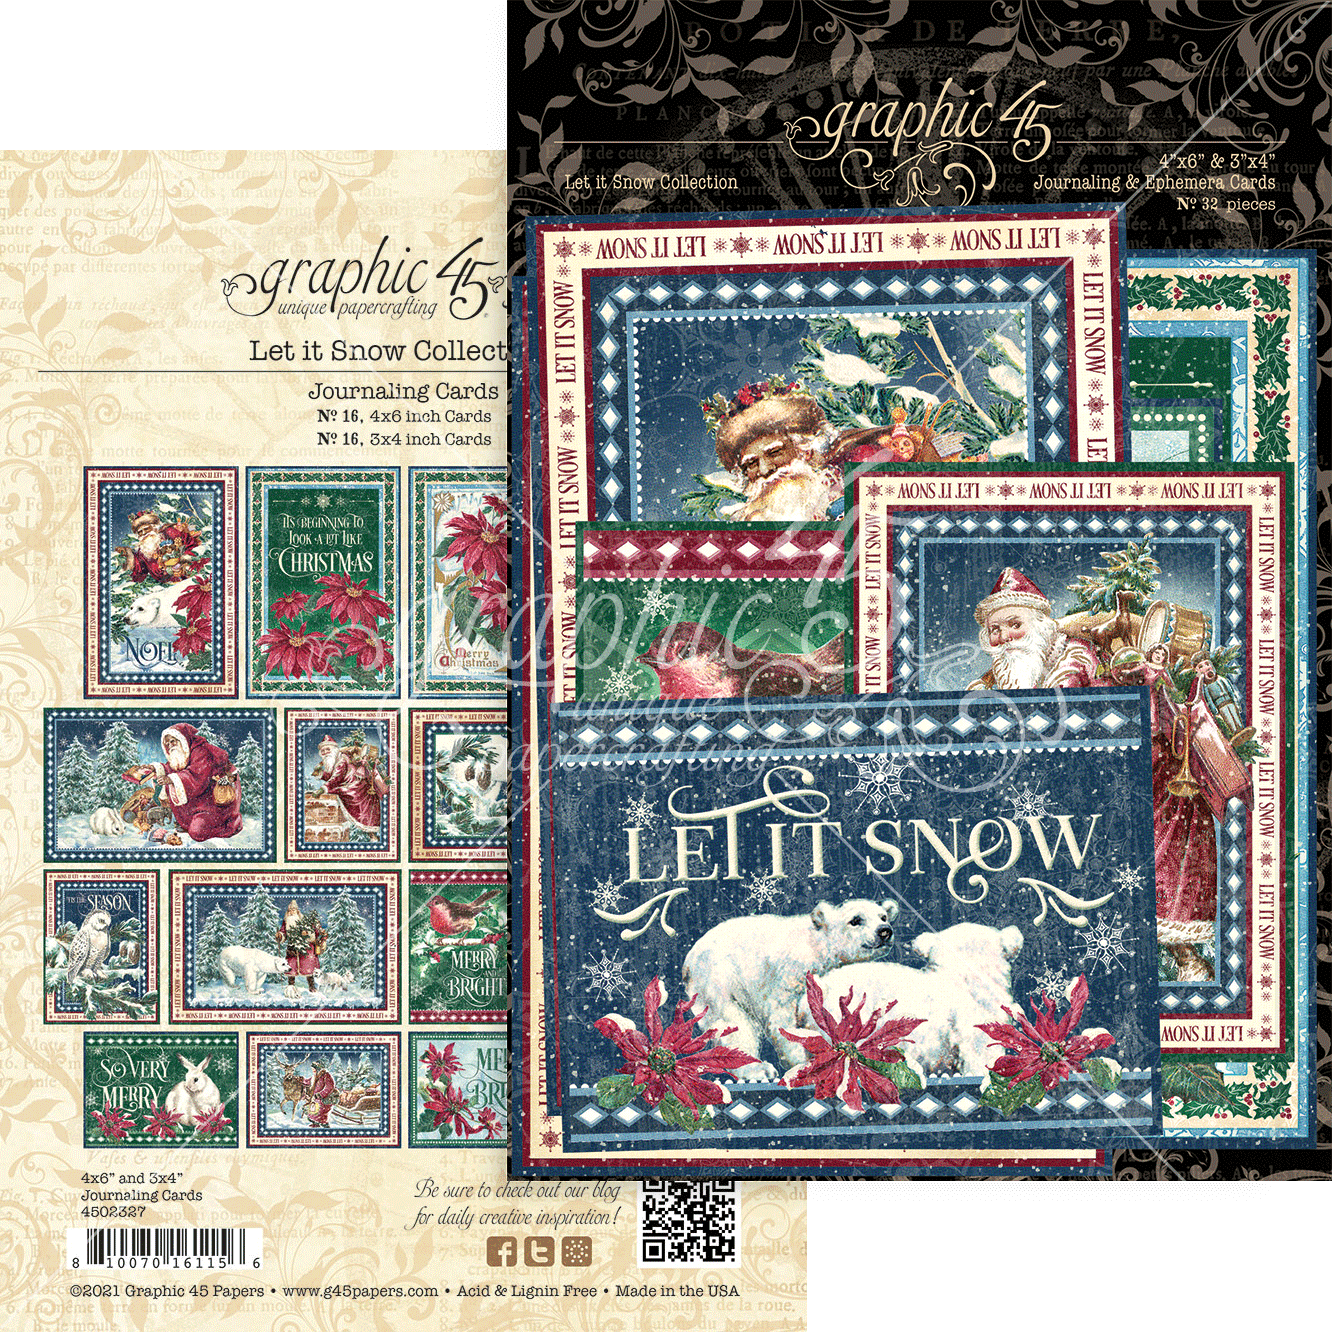 Let it Snow Journaling Cards - Graphic 45